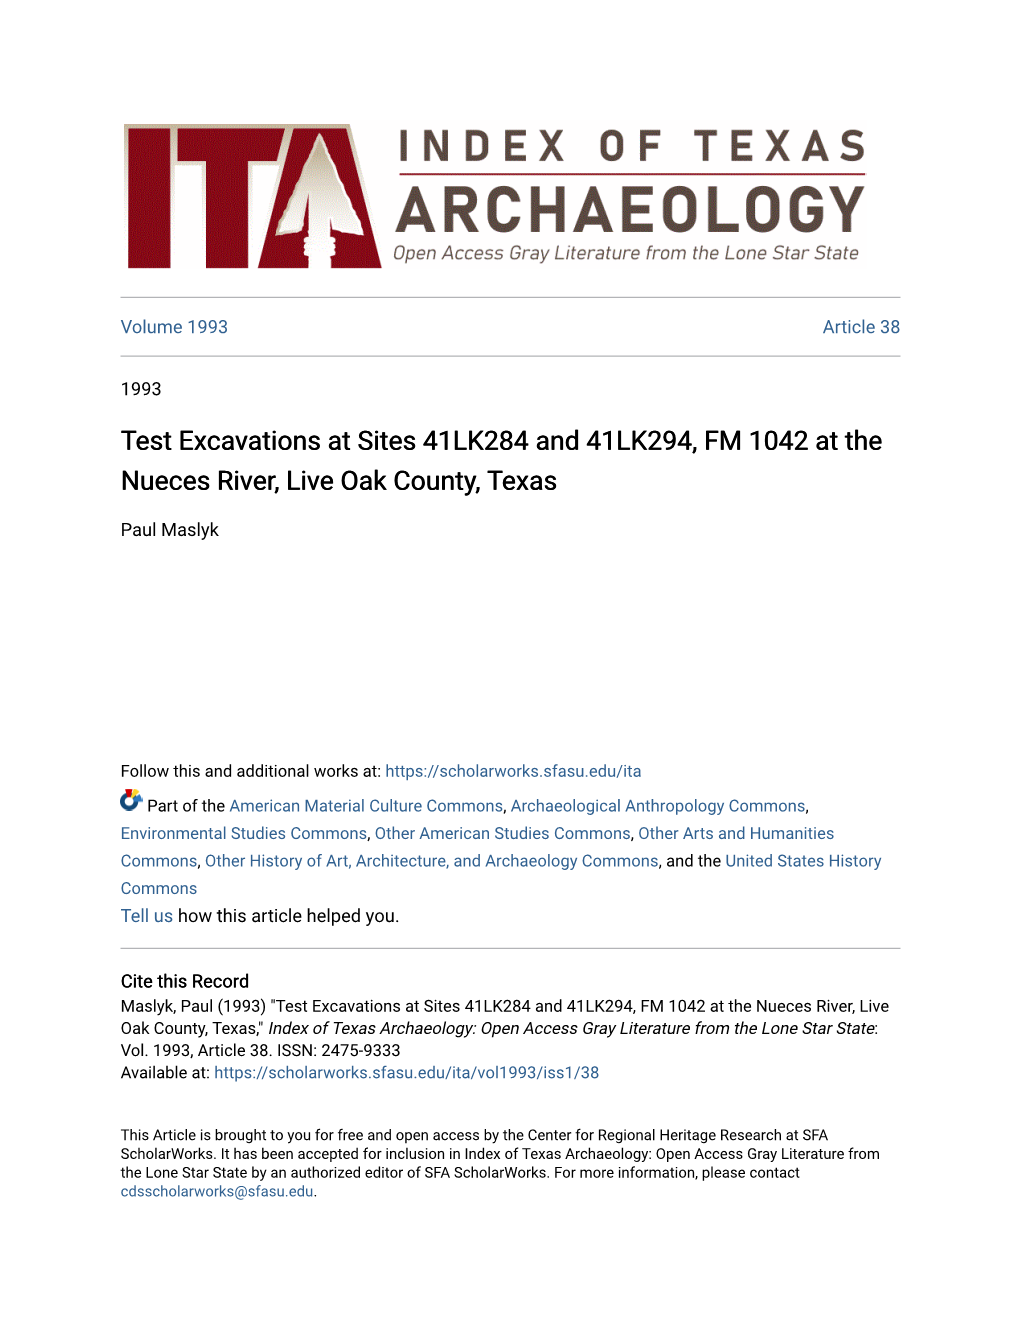 Test Excavations at Sites 41LK284 and 41LK294, FM 1042 at the Nueces River, Live Oak County, Texas